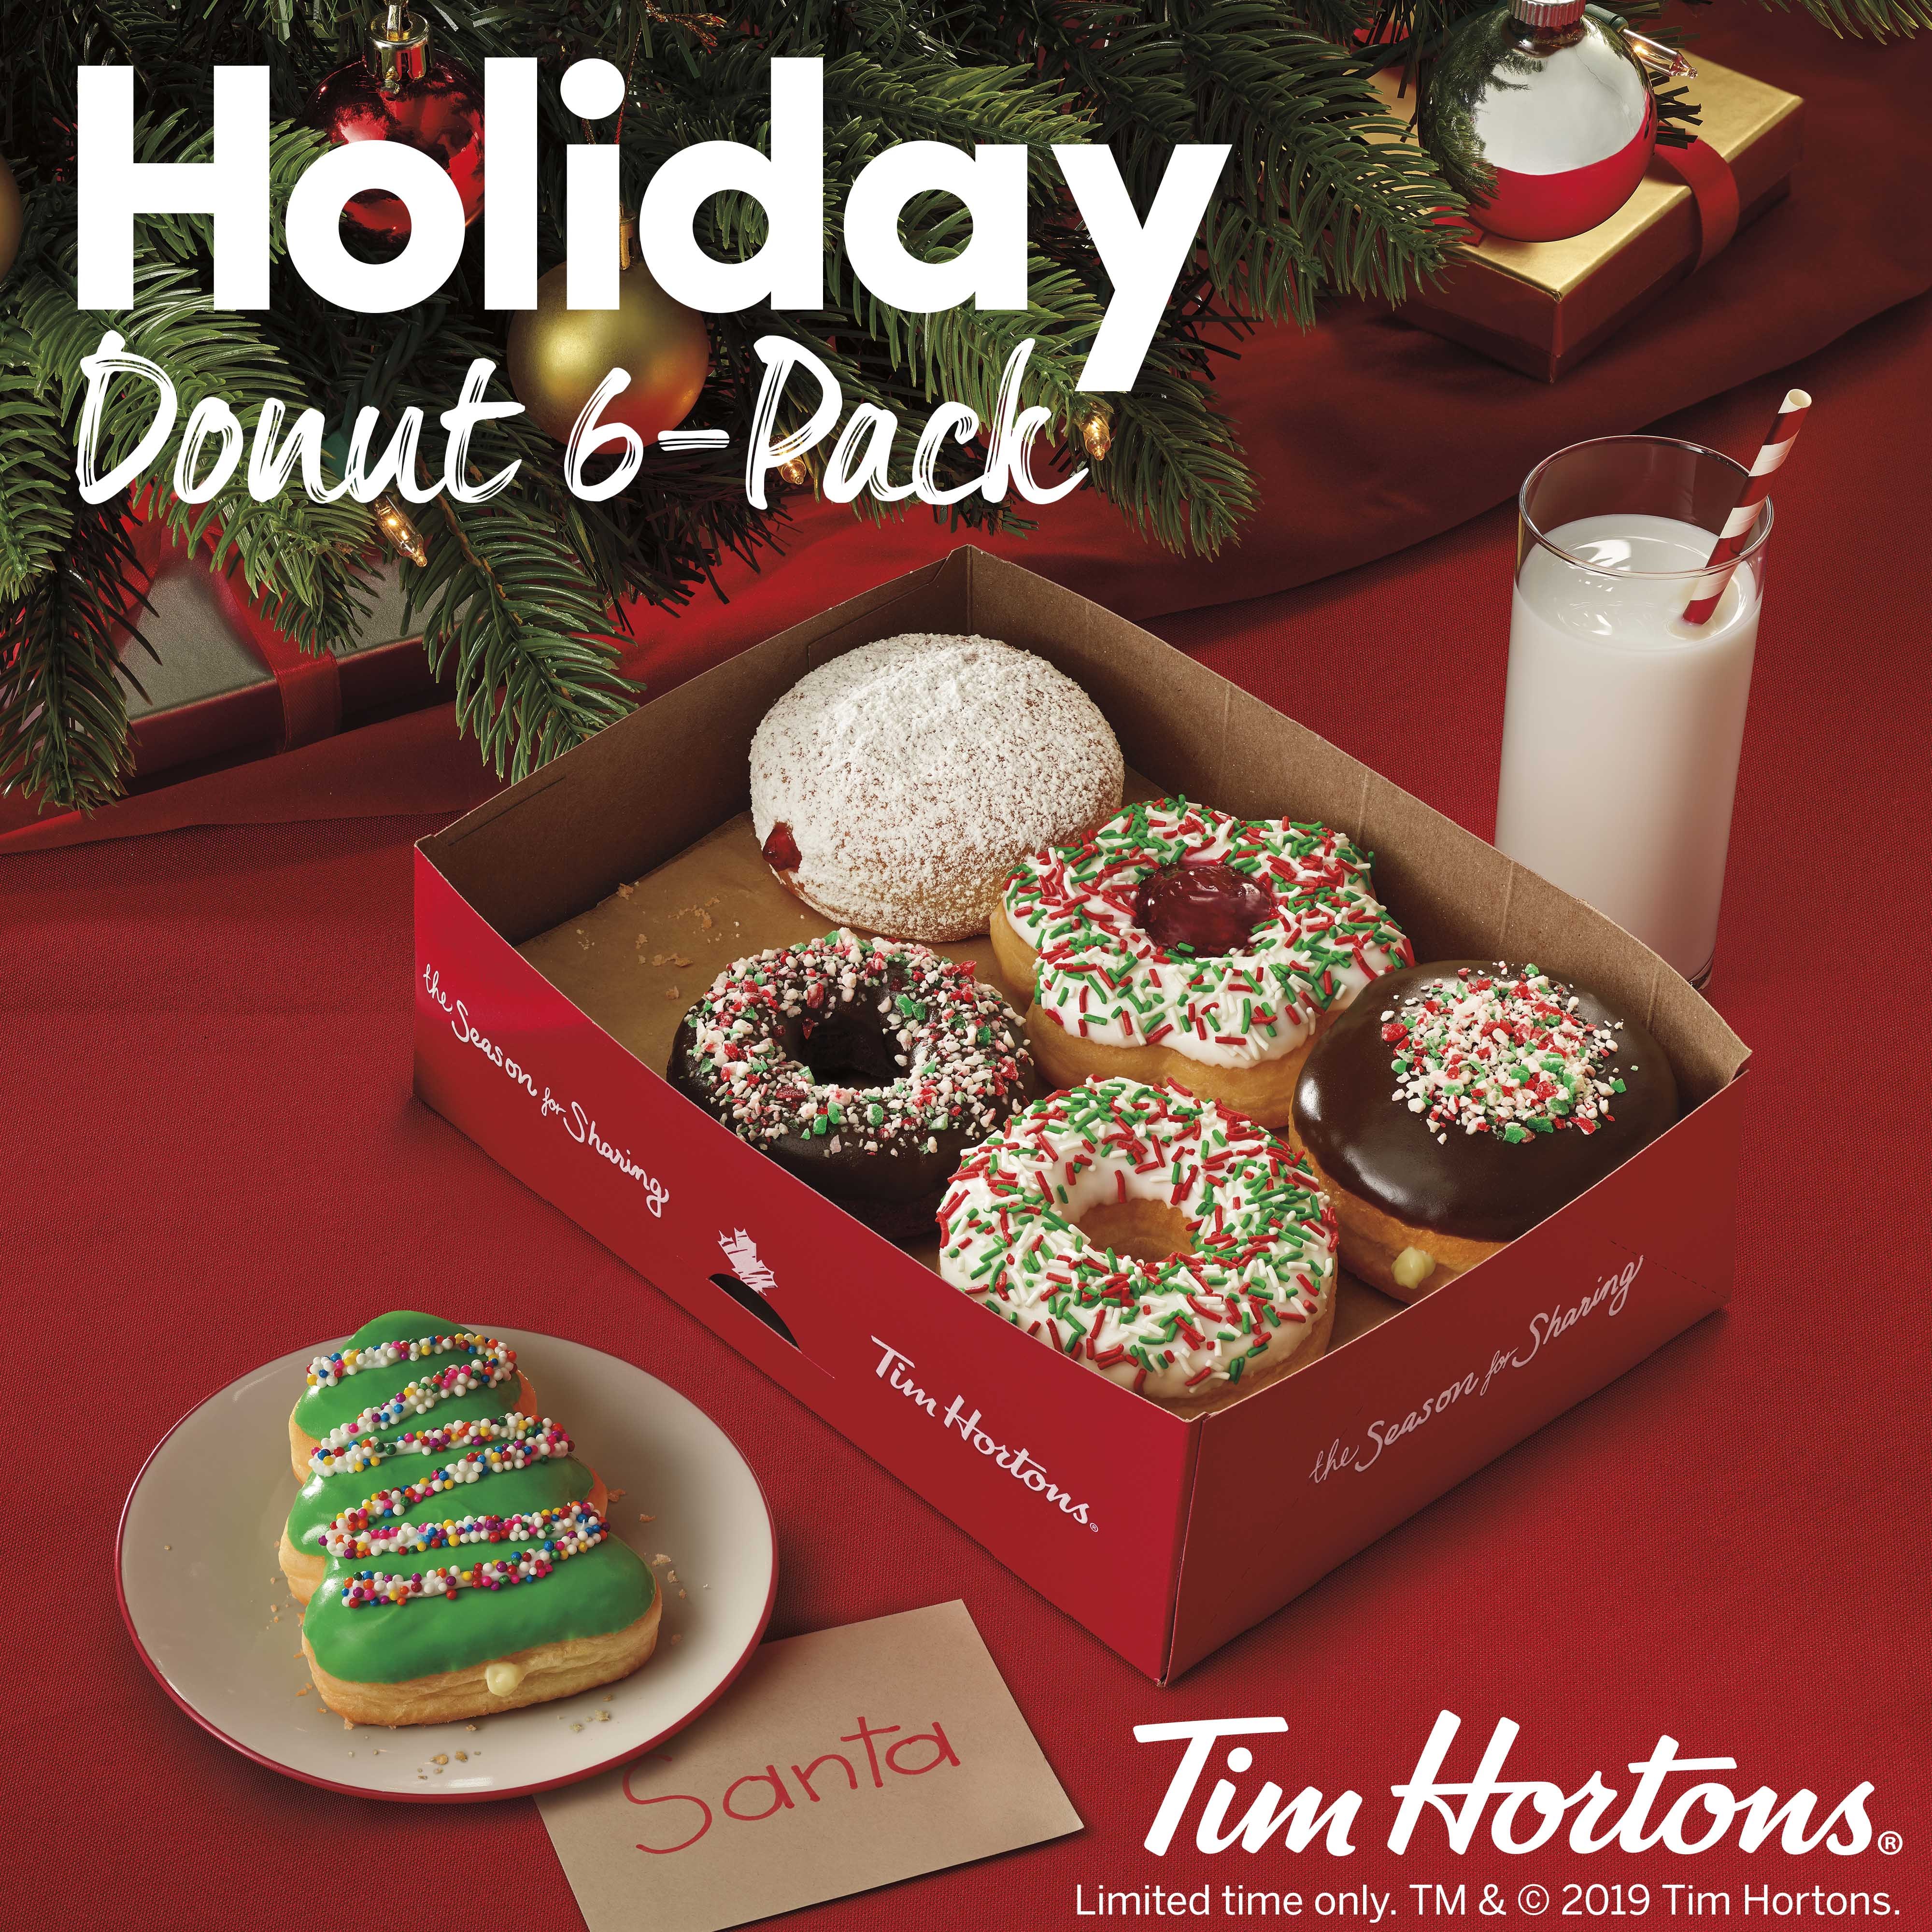 Tim Hortons just launched its new holiday cups and seasonal menu